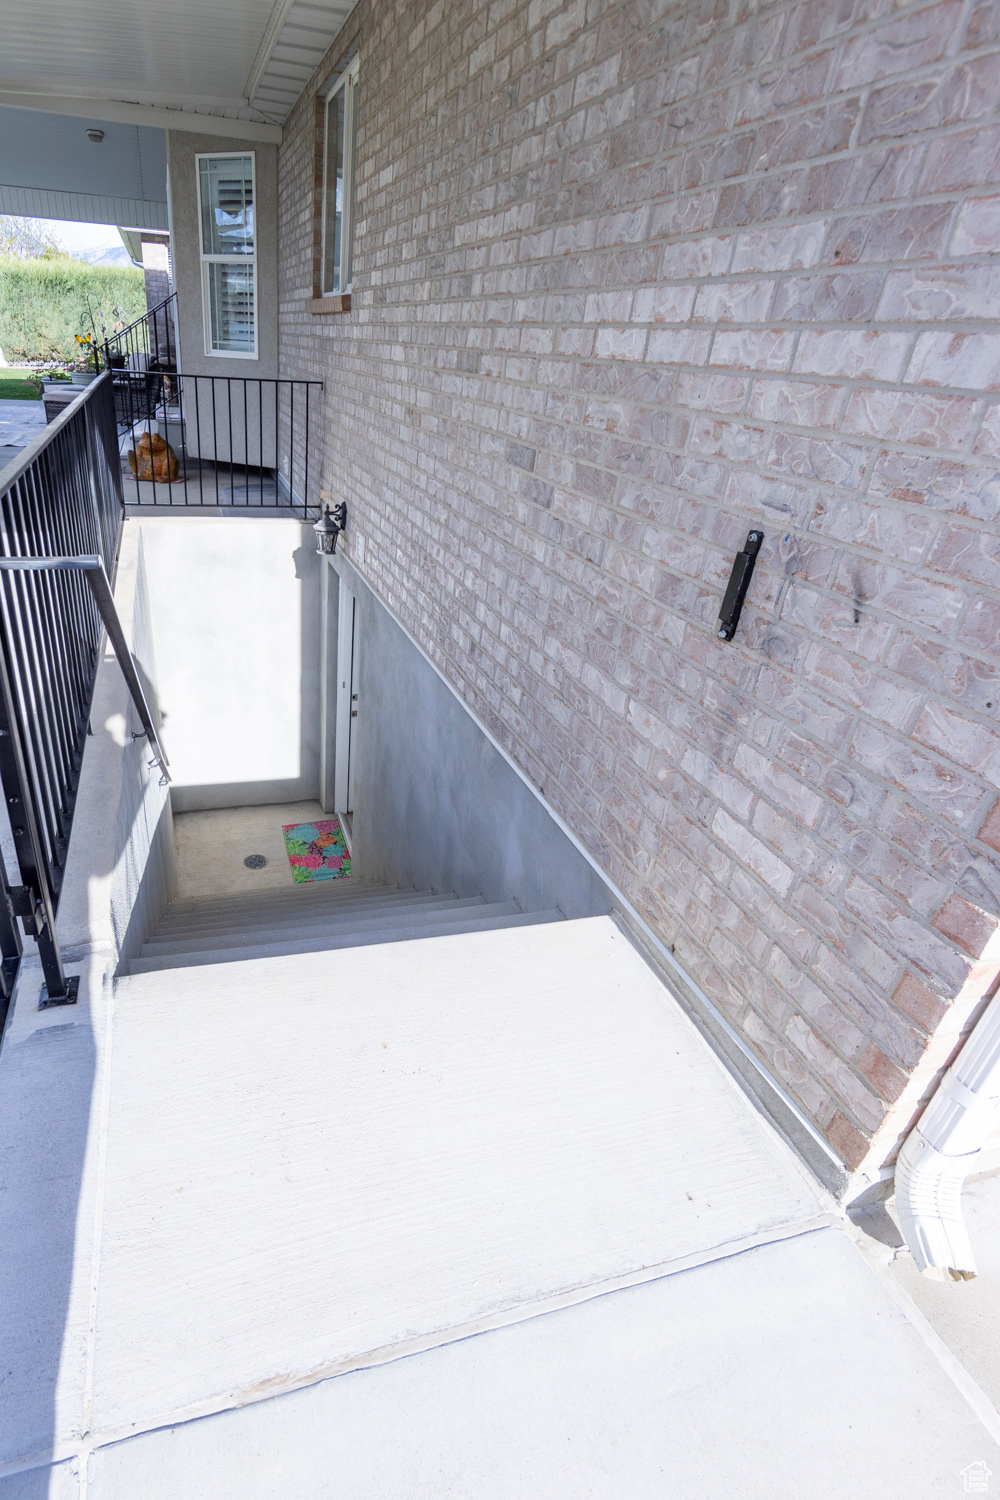 Exterior stairs with a separate entry into the basement.